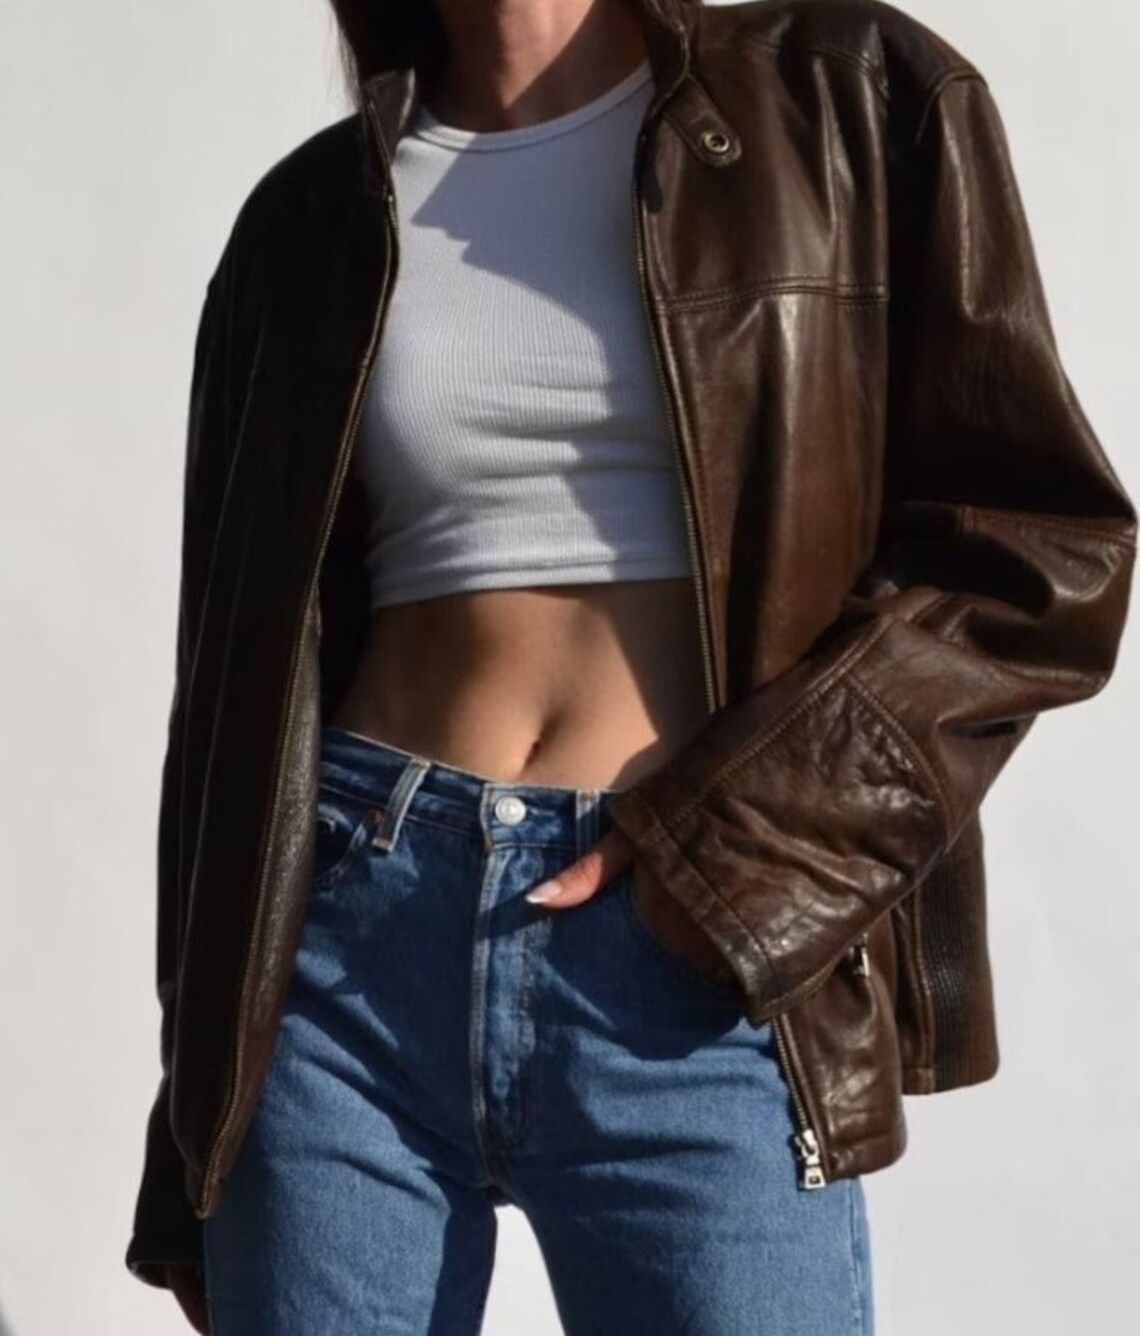 Vintage-inspired Brown Leather Jackets for Women: Oversized Bomber and ...